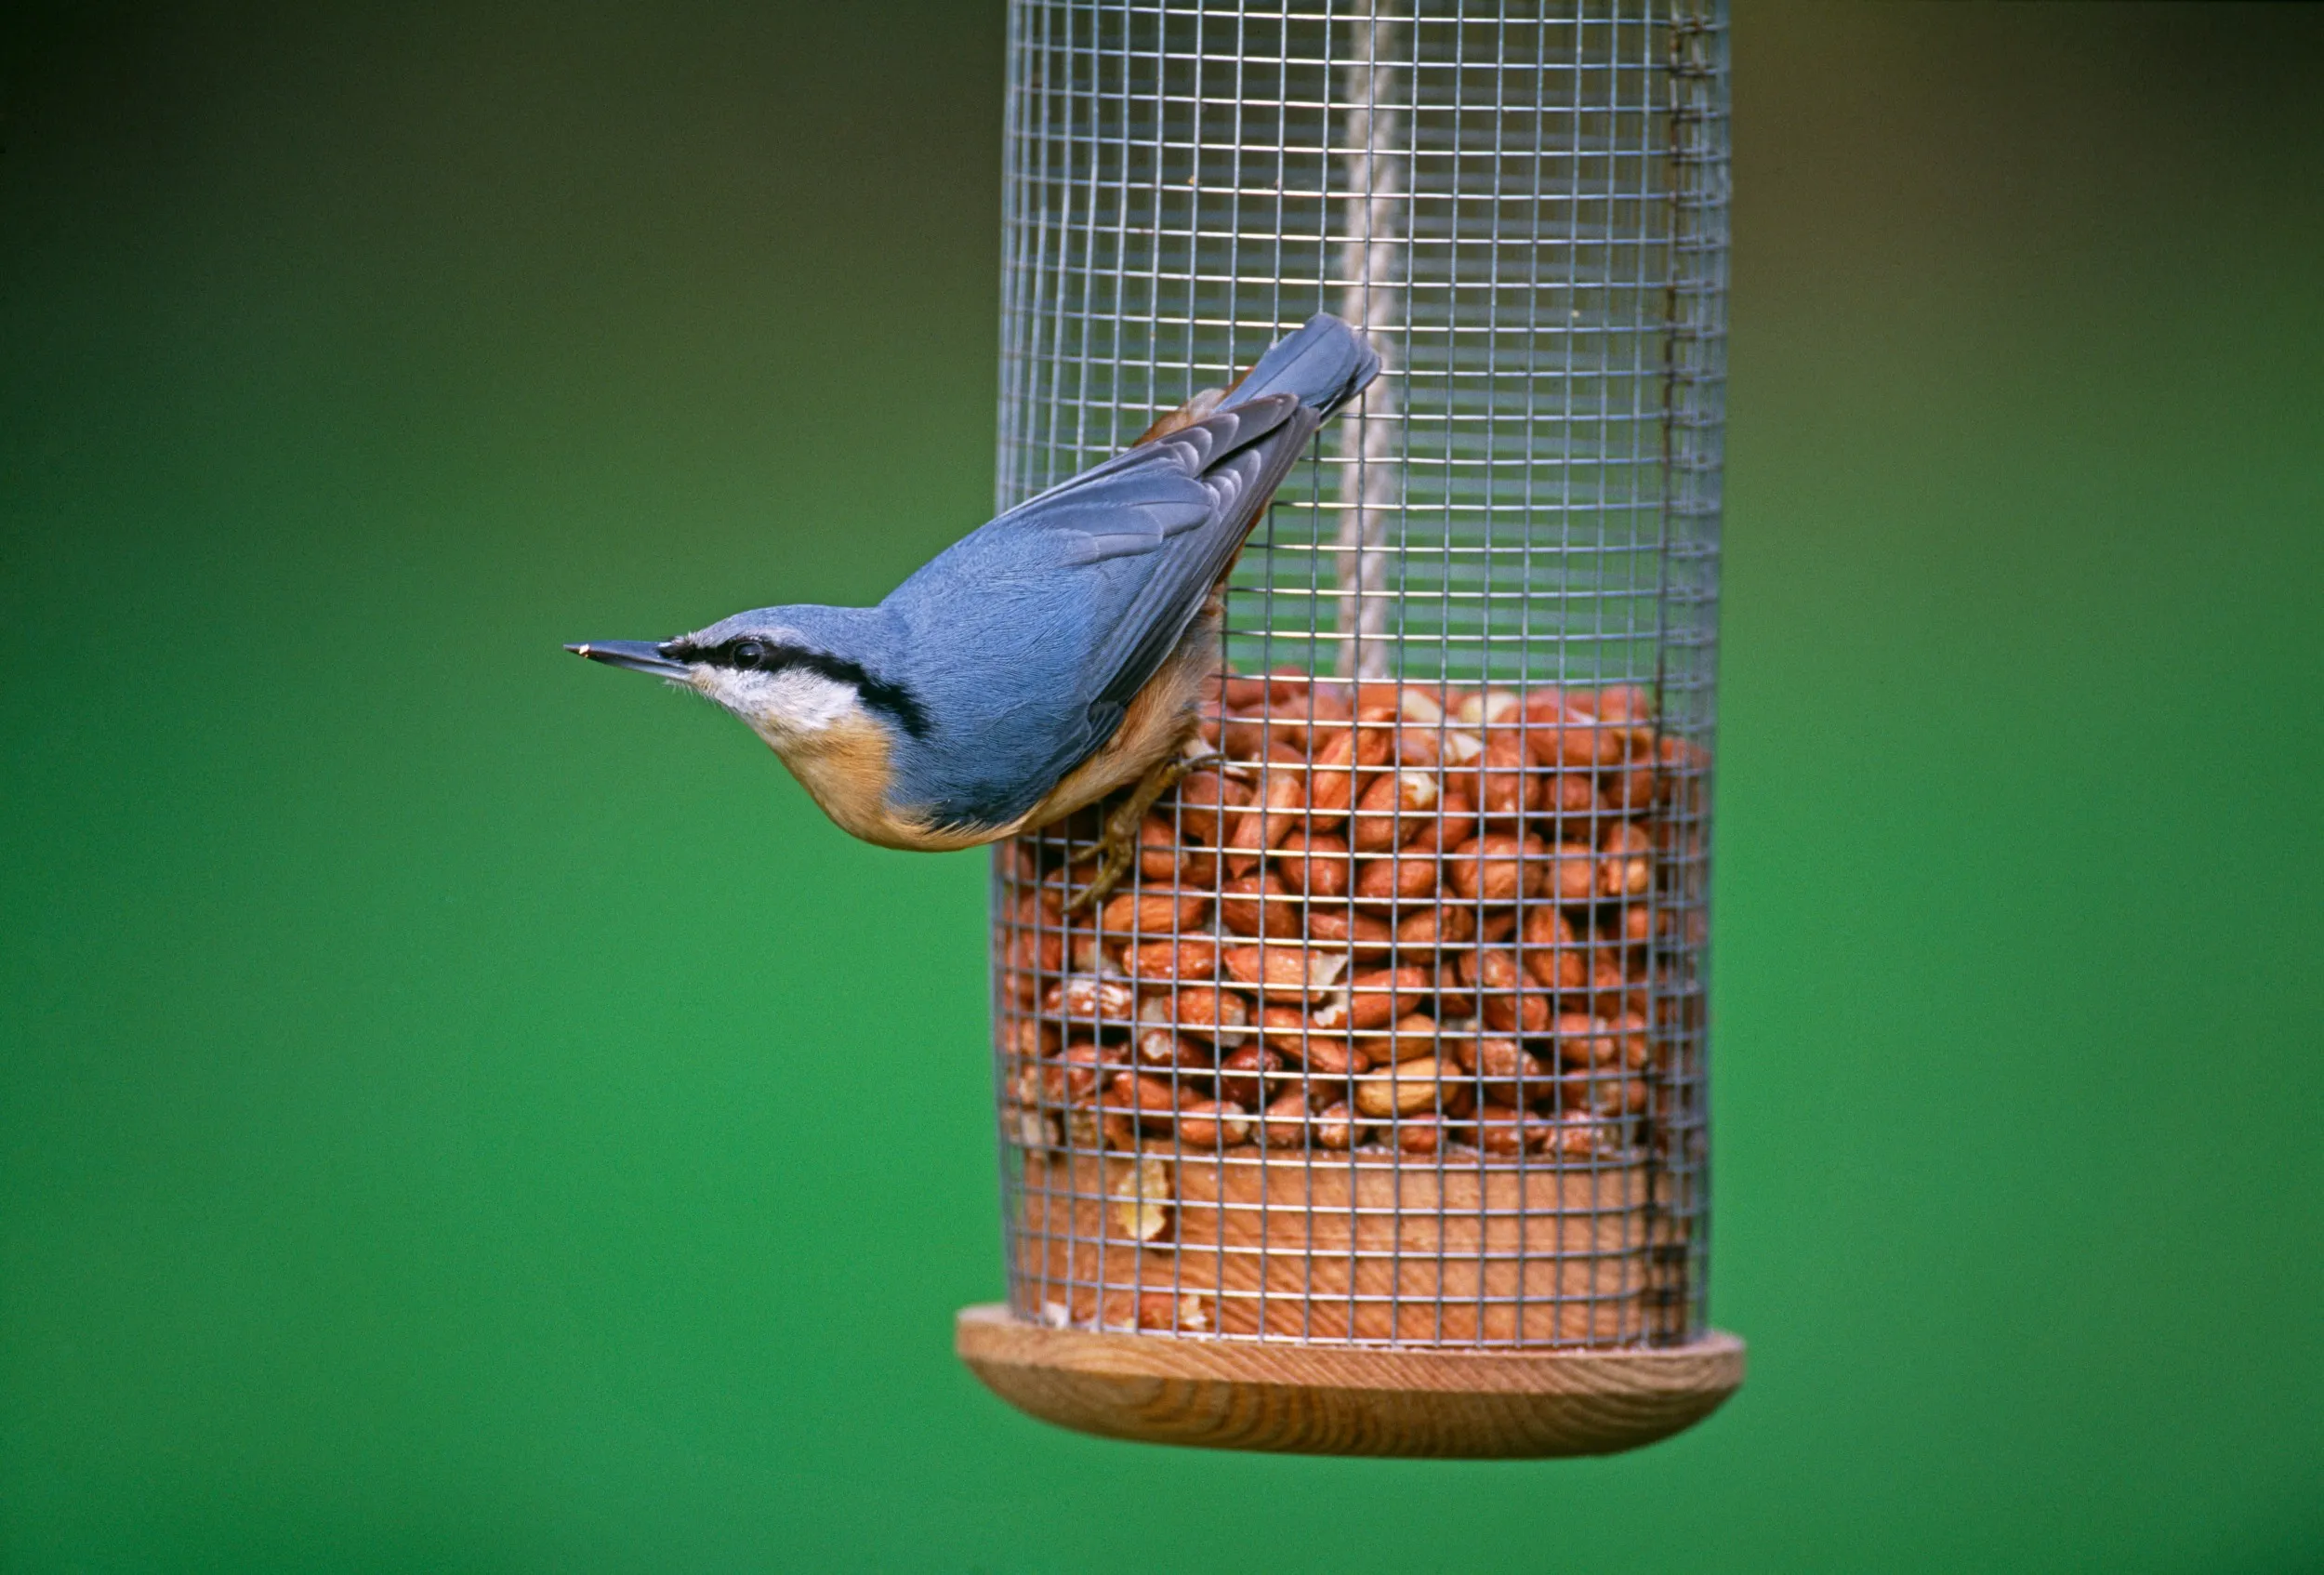 A Nuthatch, perched on a feeder filled with peanuts, looking up.